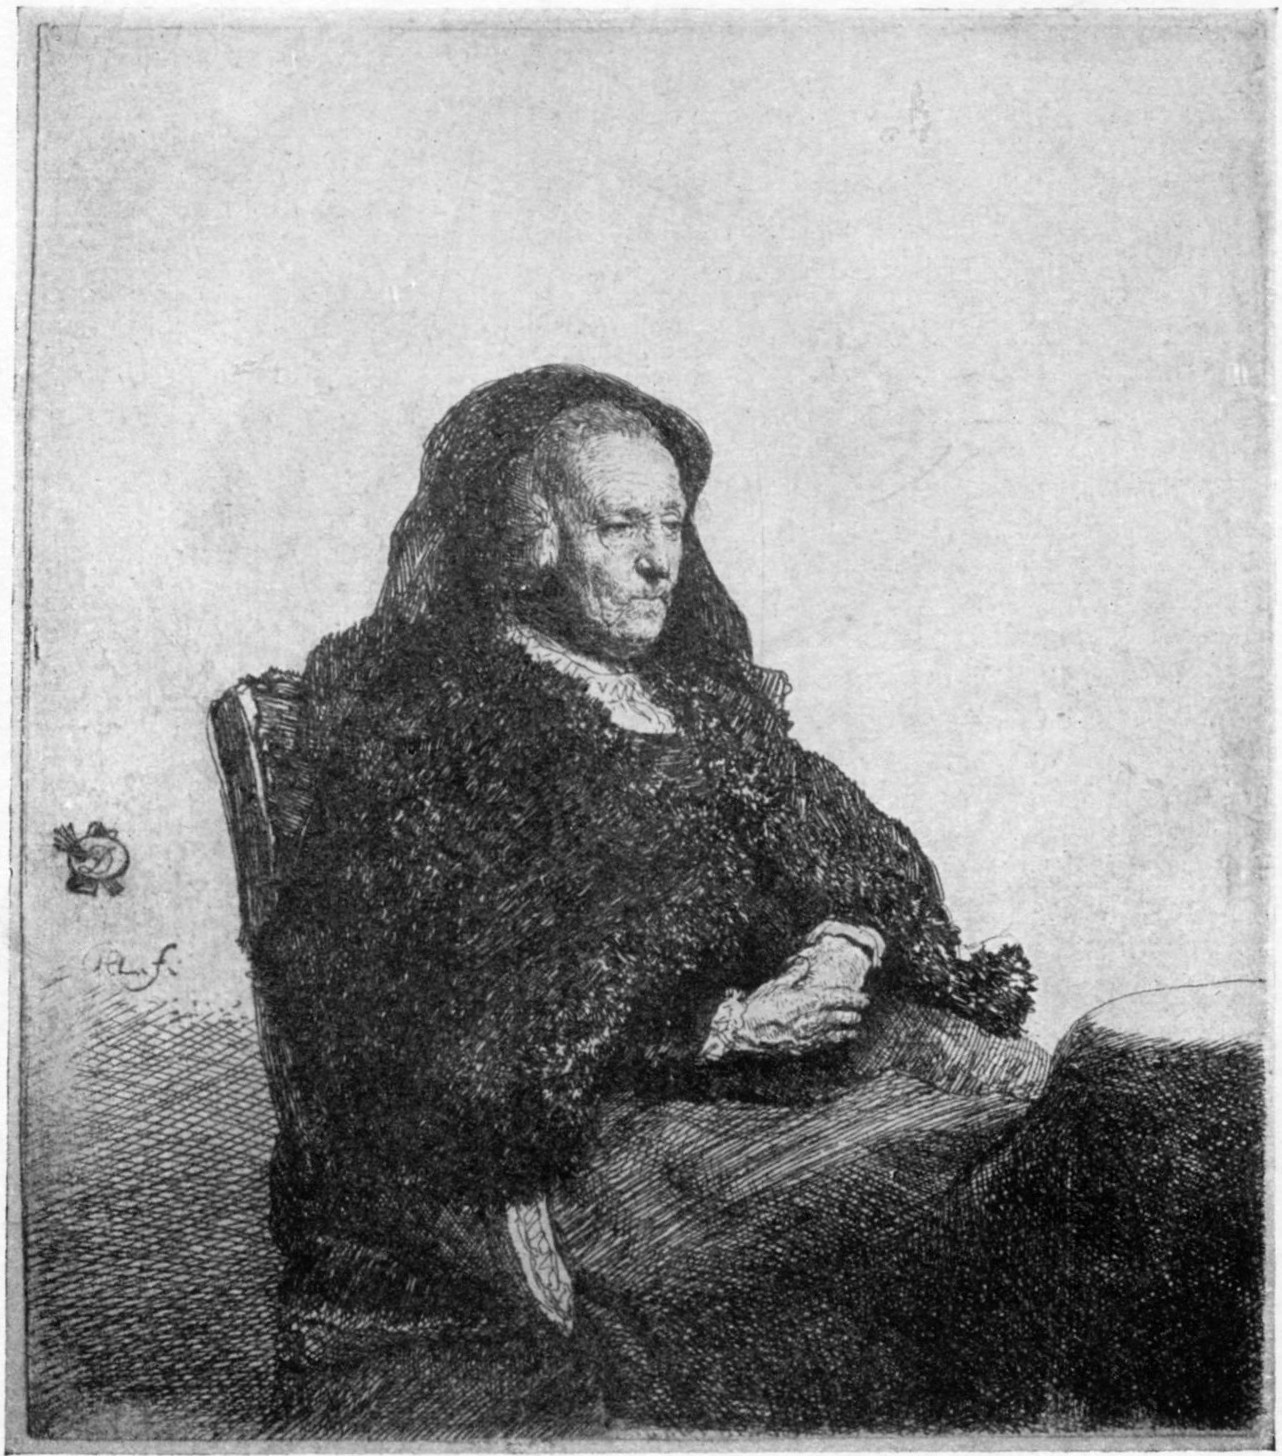 52, III. REMBRANDT'S MOTHER SEATED. (1631.) B. 343.